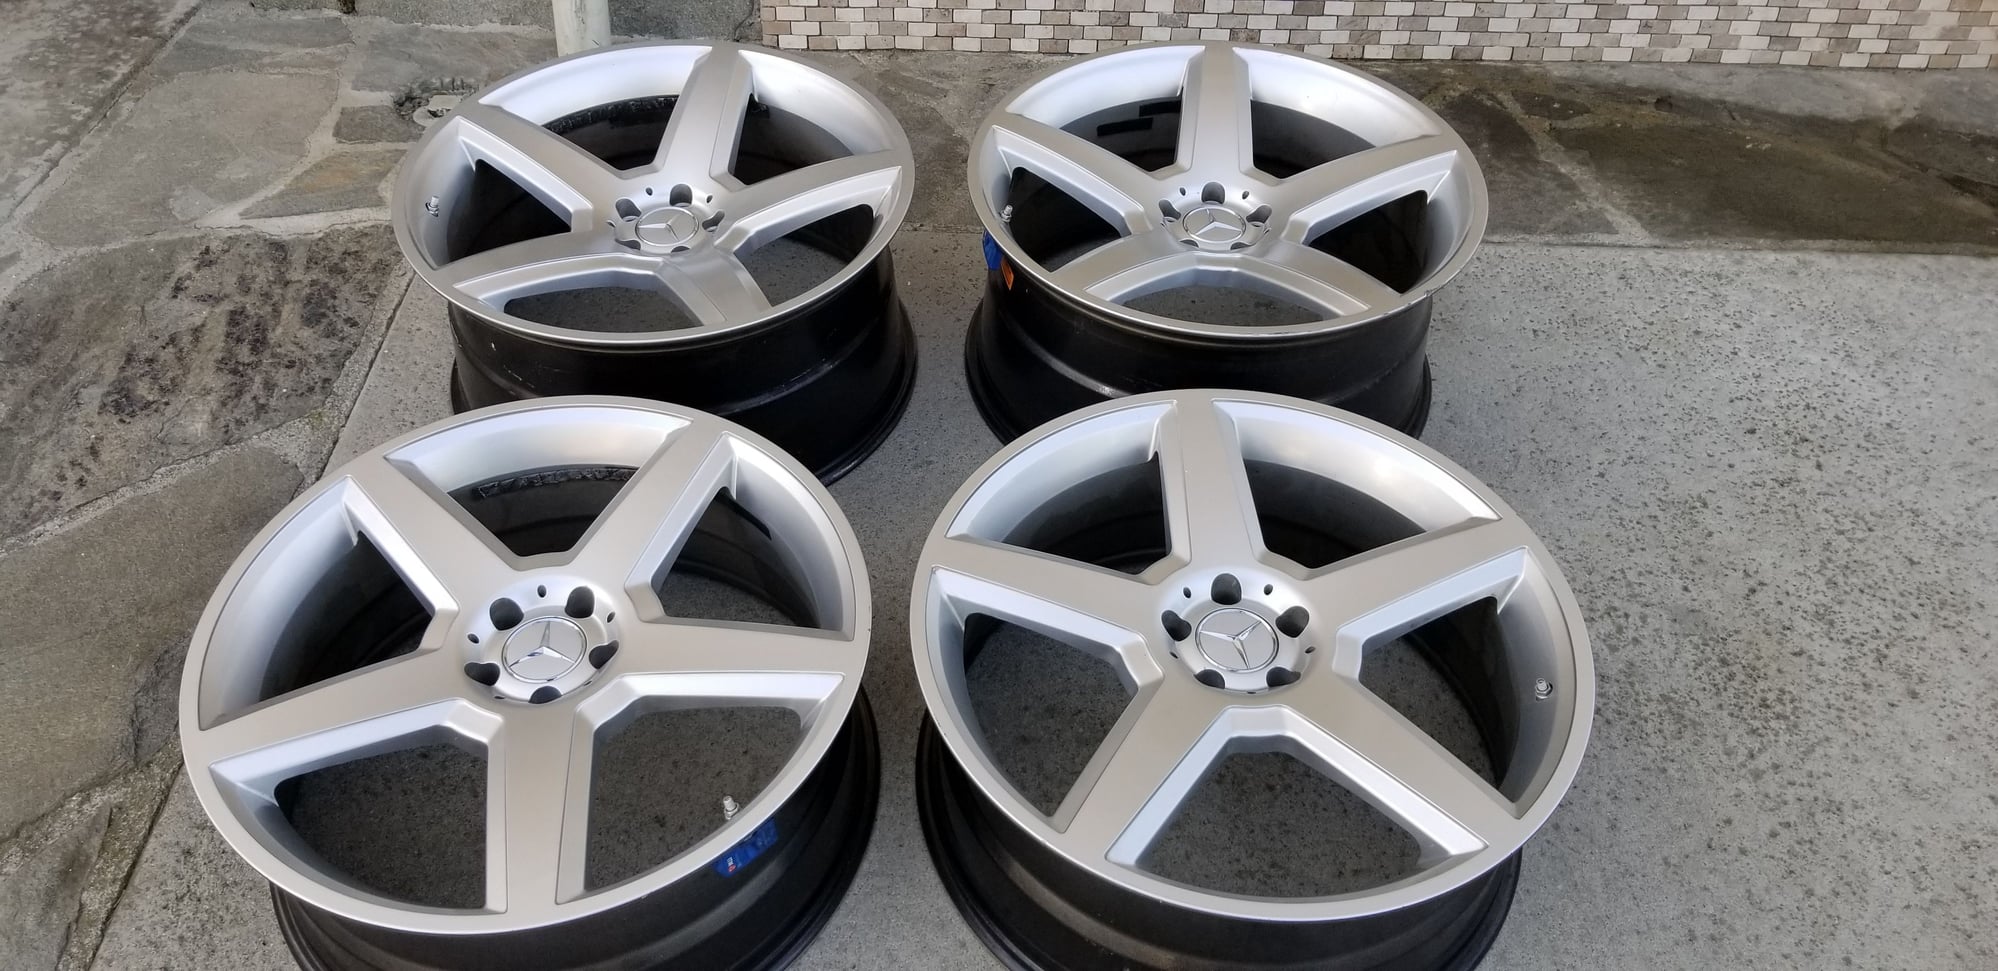 Wheels and Tires/Axles - 22" AMG rep wheels 5x112 Staggered Mercedes S550 GL450 ML350 - Used - 2007 to 2019 Mercedes-Benz S550 - San Gabriel Valley, CA 91745, United States